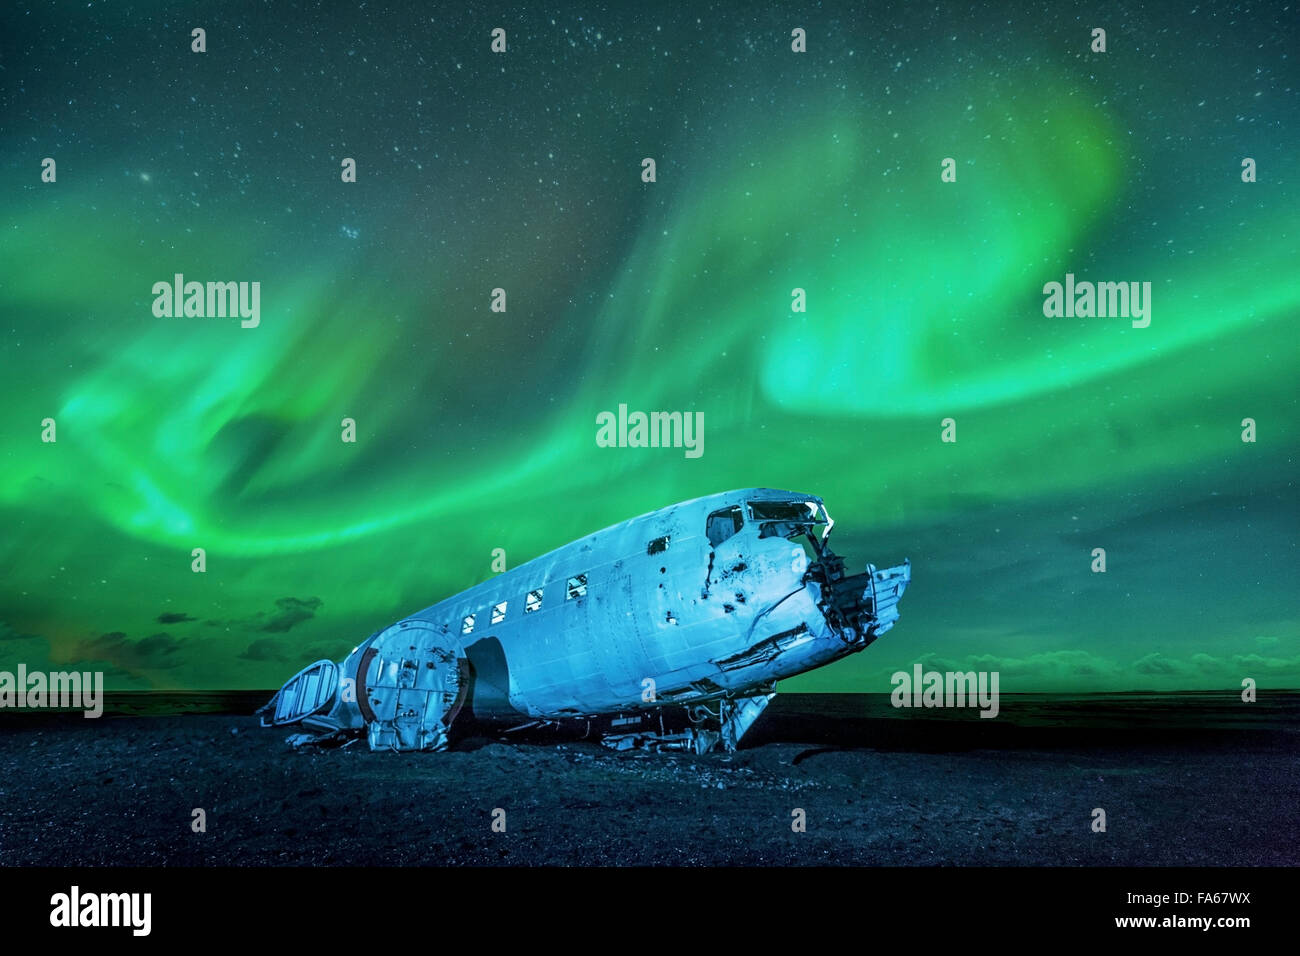 Northern lights over plane wreckage, Iceland Stock Photo